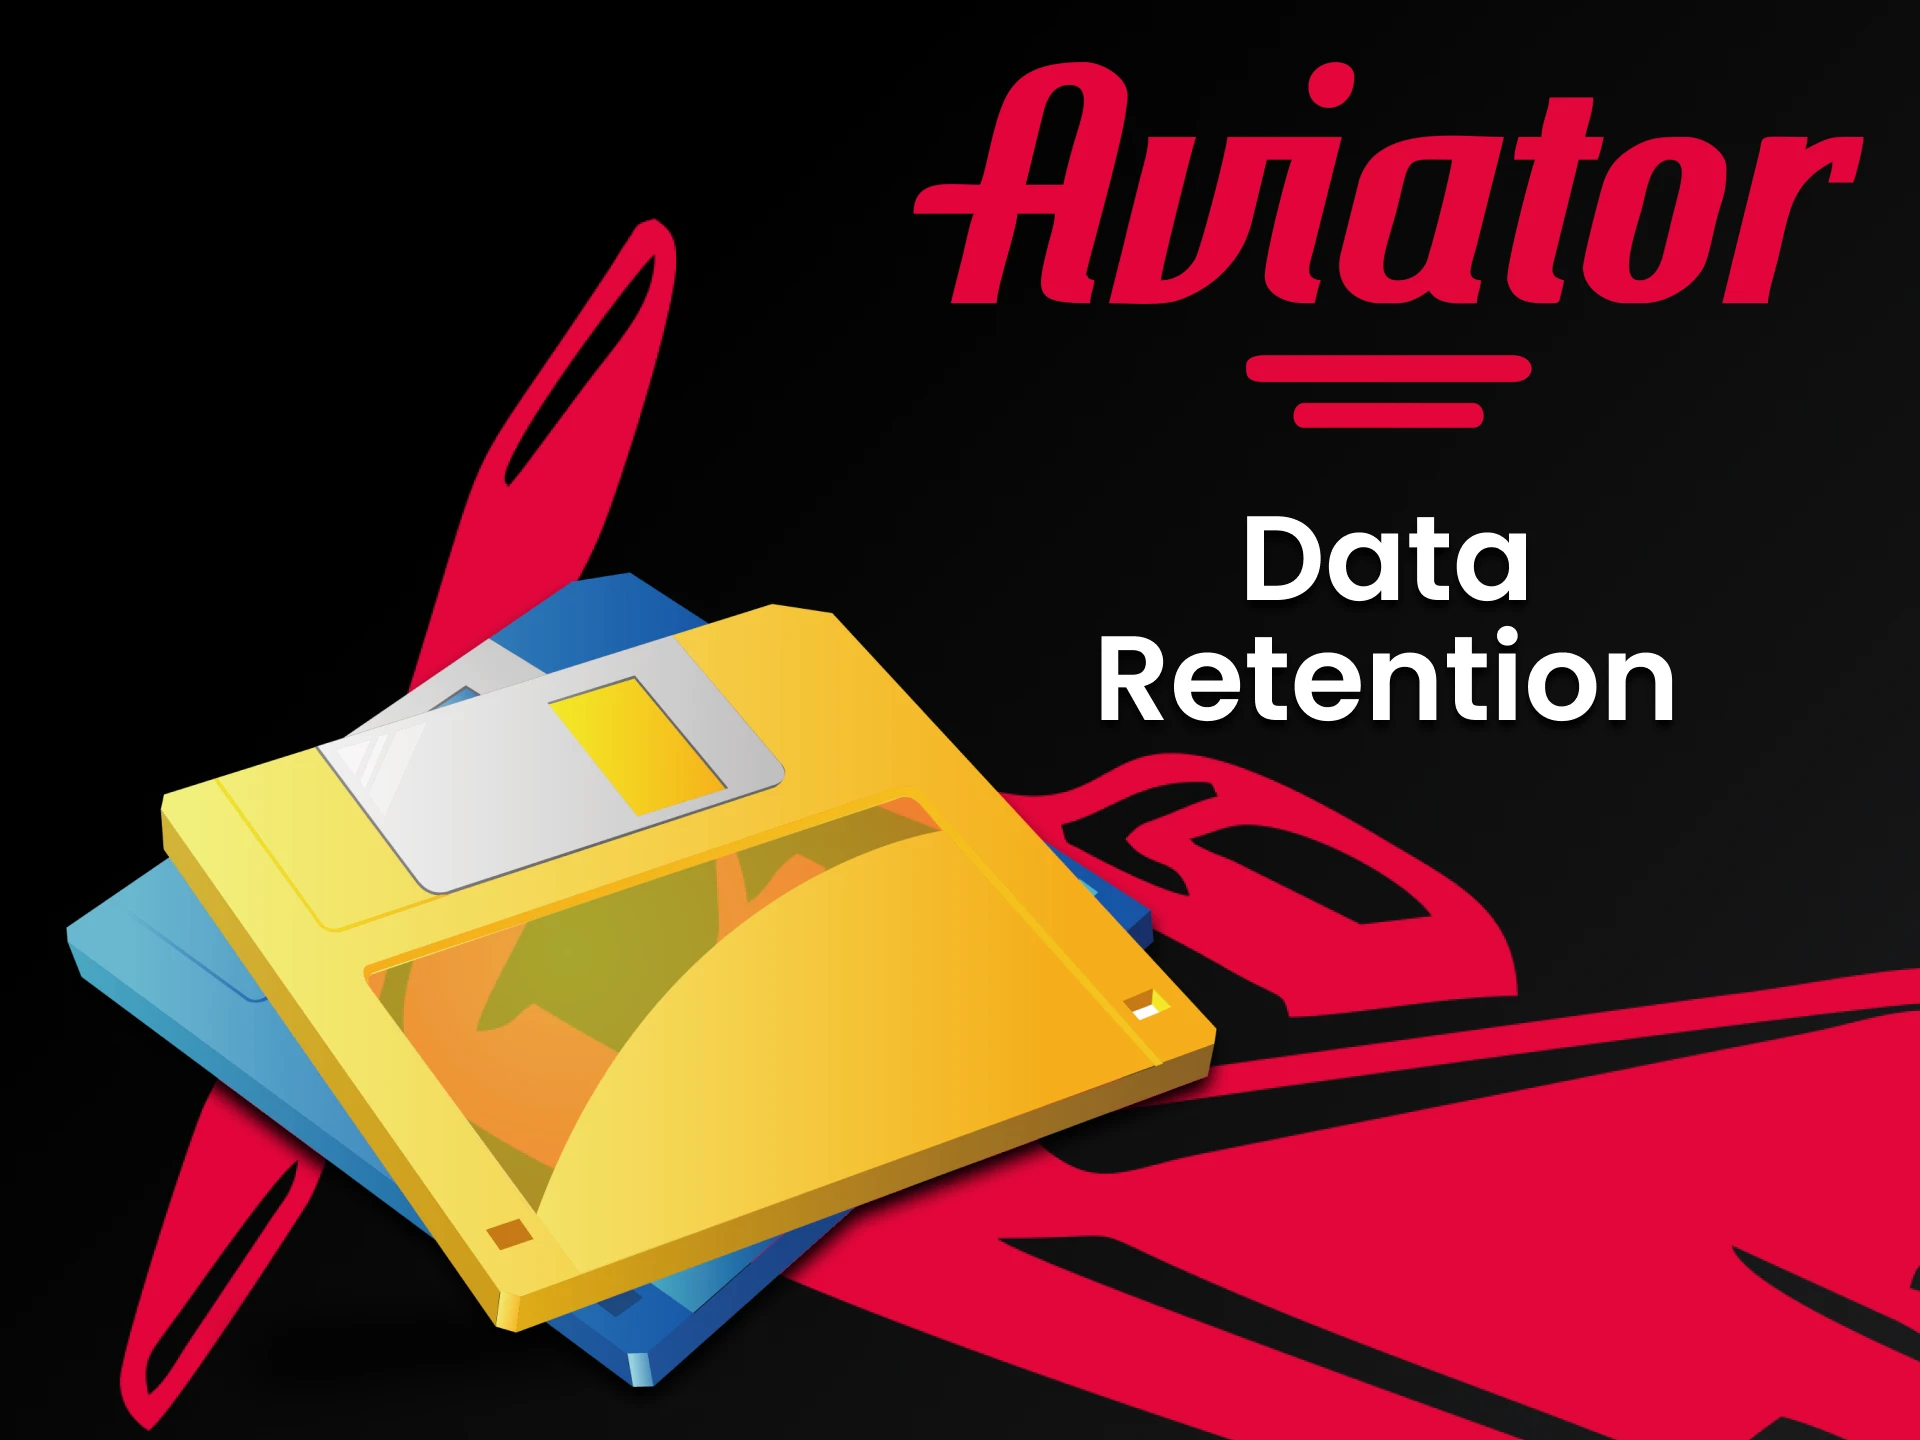 We will tell you how your data is stored on the Aviator website.